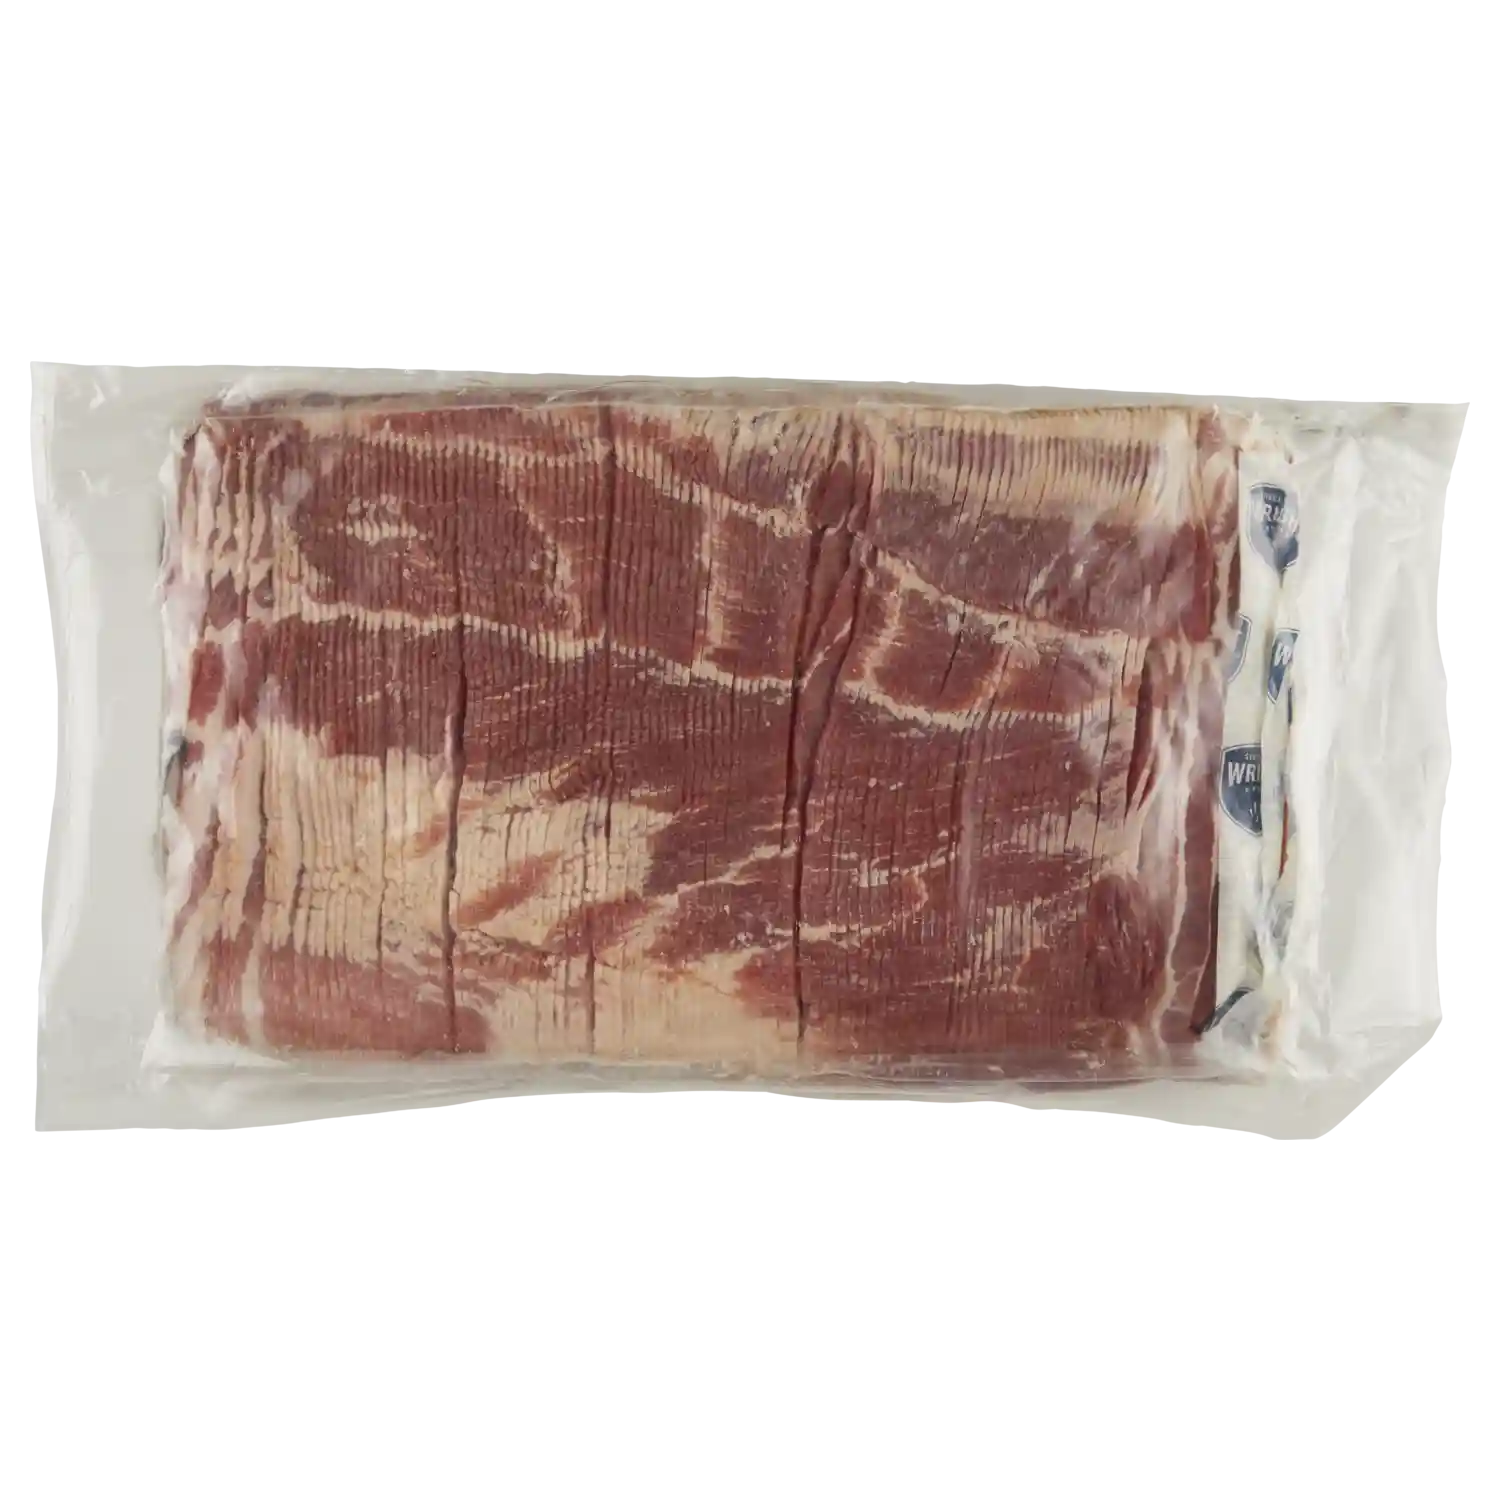 Wright® Brand Naturally Applewood Smoked Thin Sliced Bacon, Bulk, 15Lbs, 18-22 Slices per pound, Gas Flushed_image_21